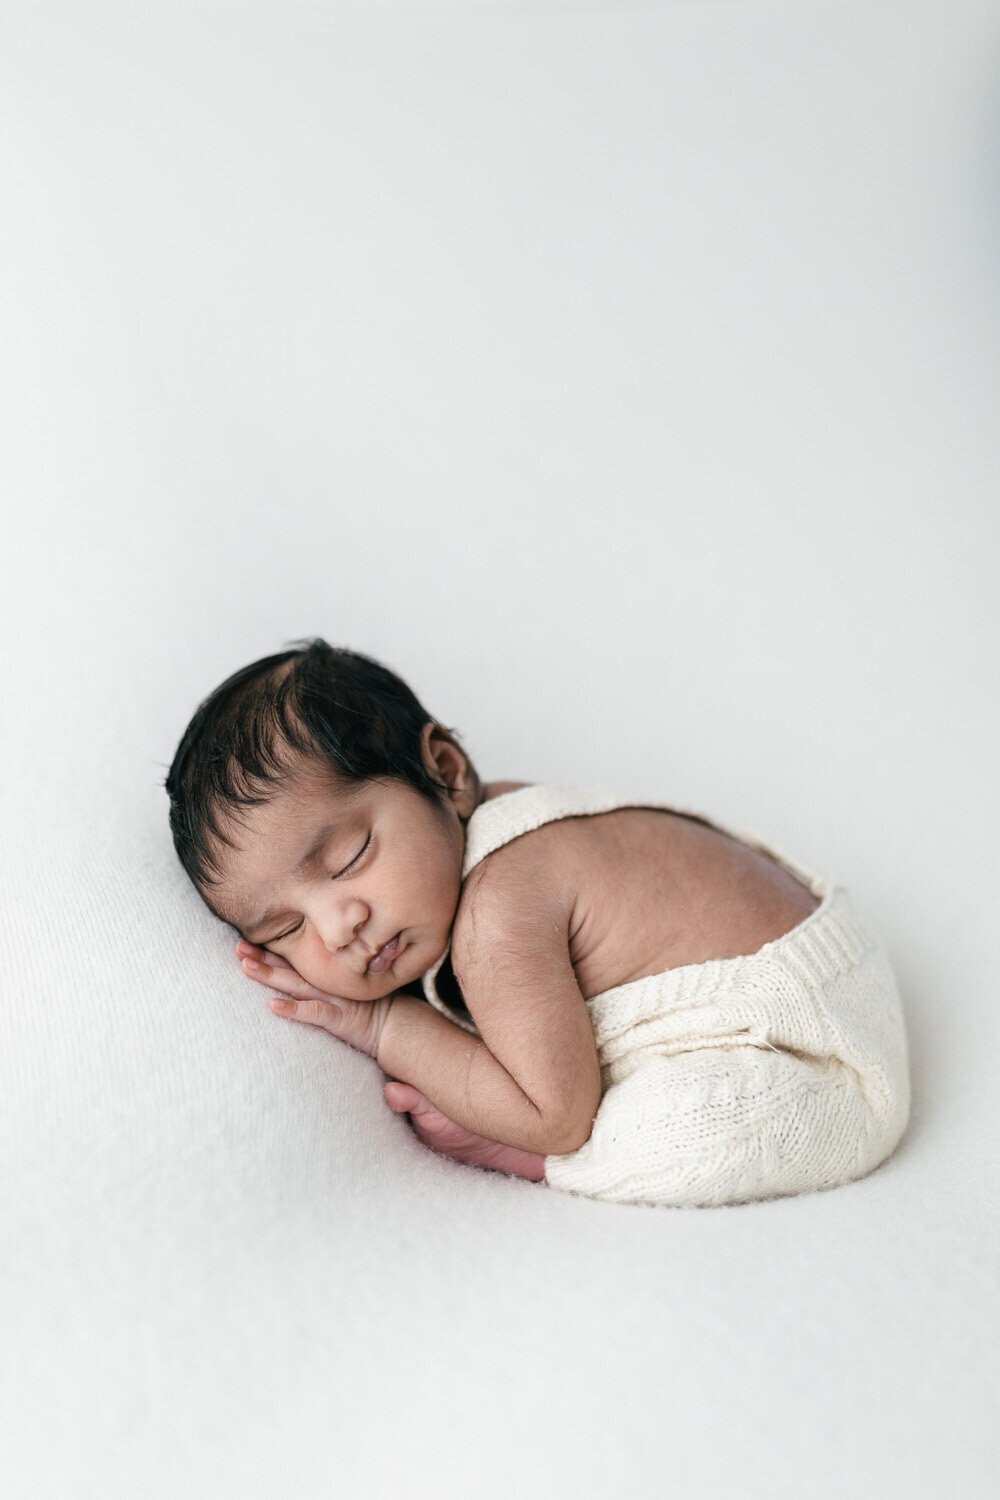 Baby in taco pose asleep against white backdrop